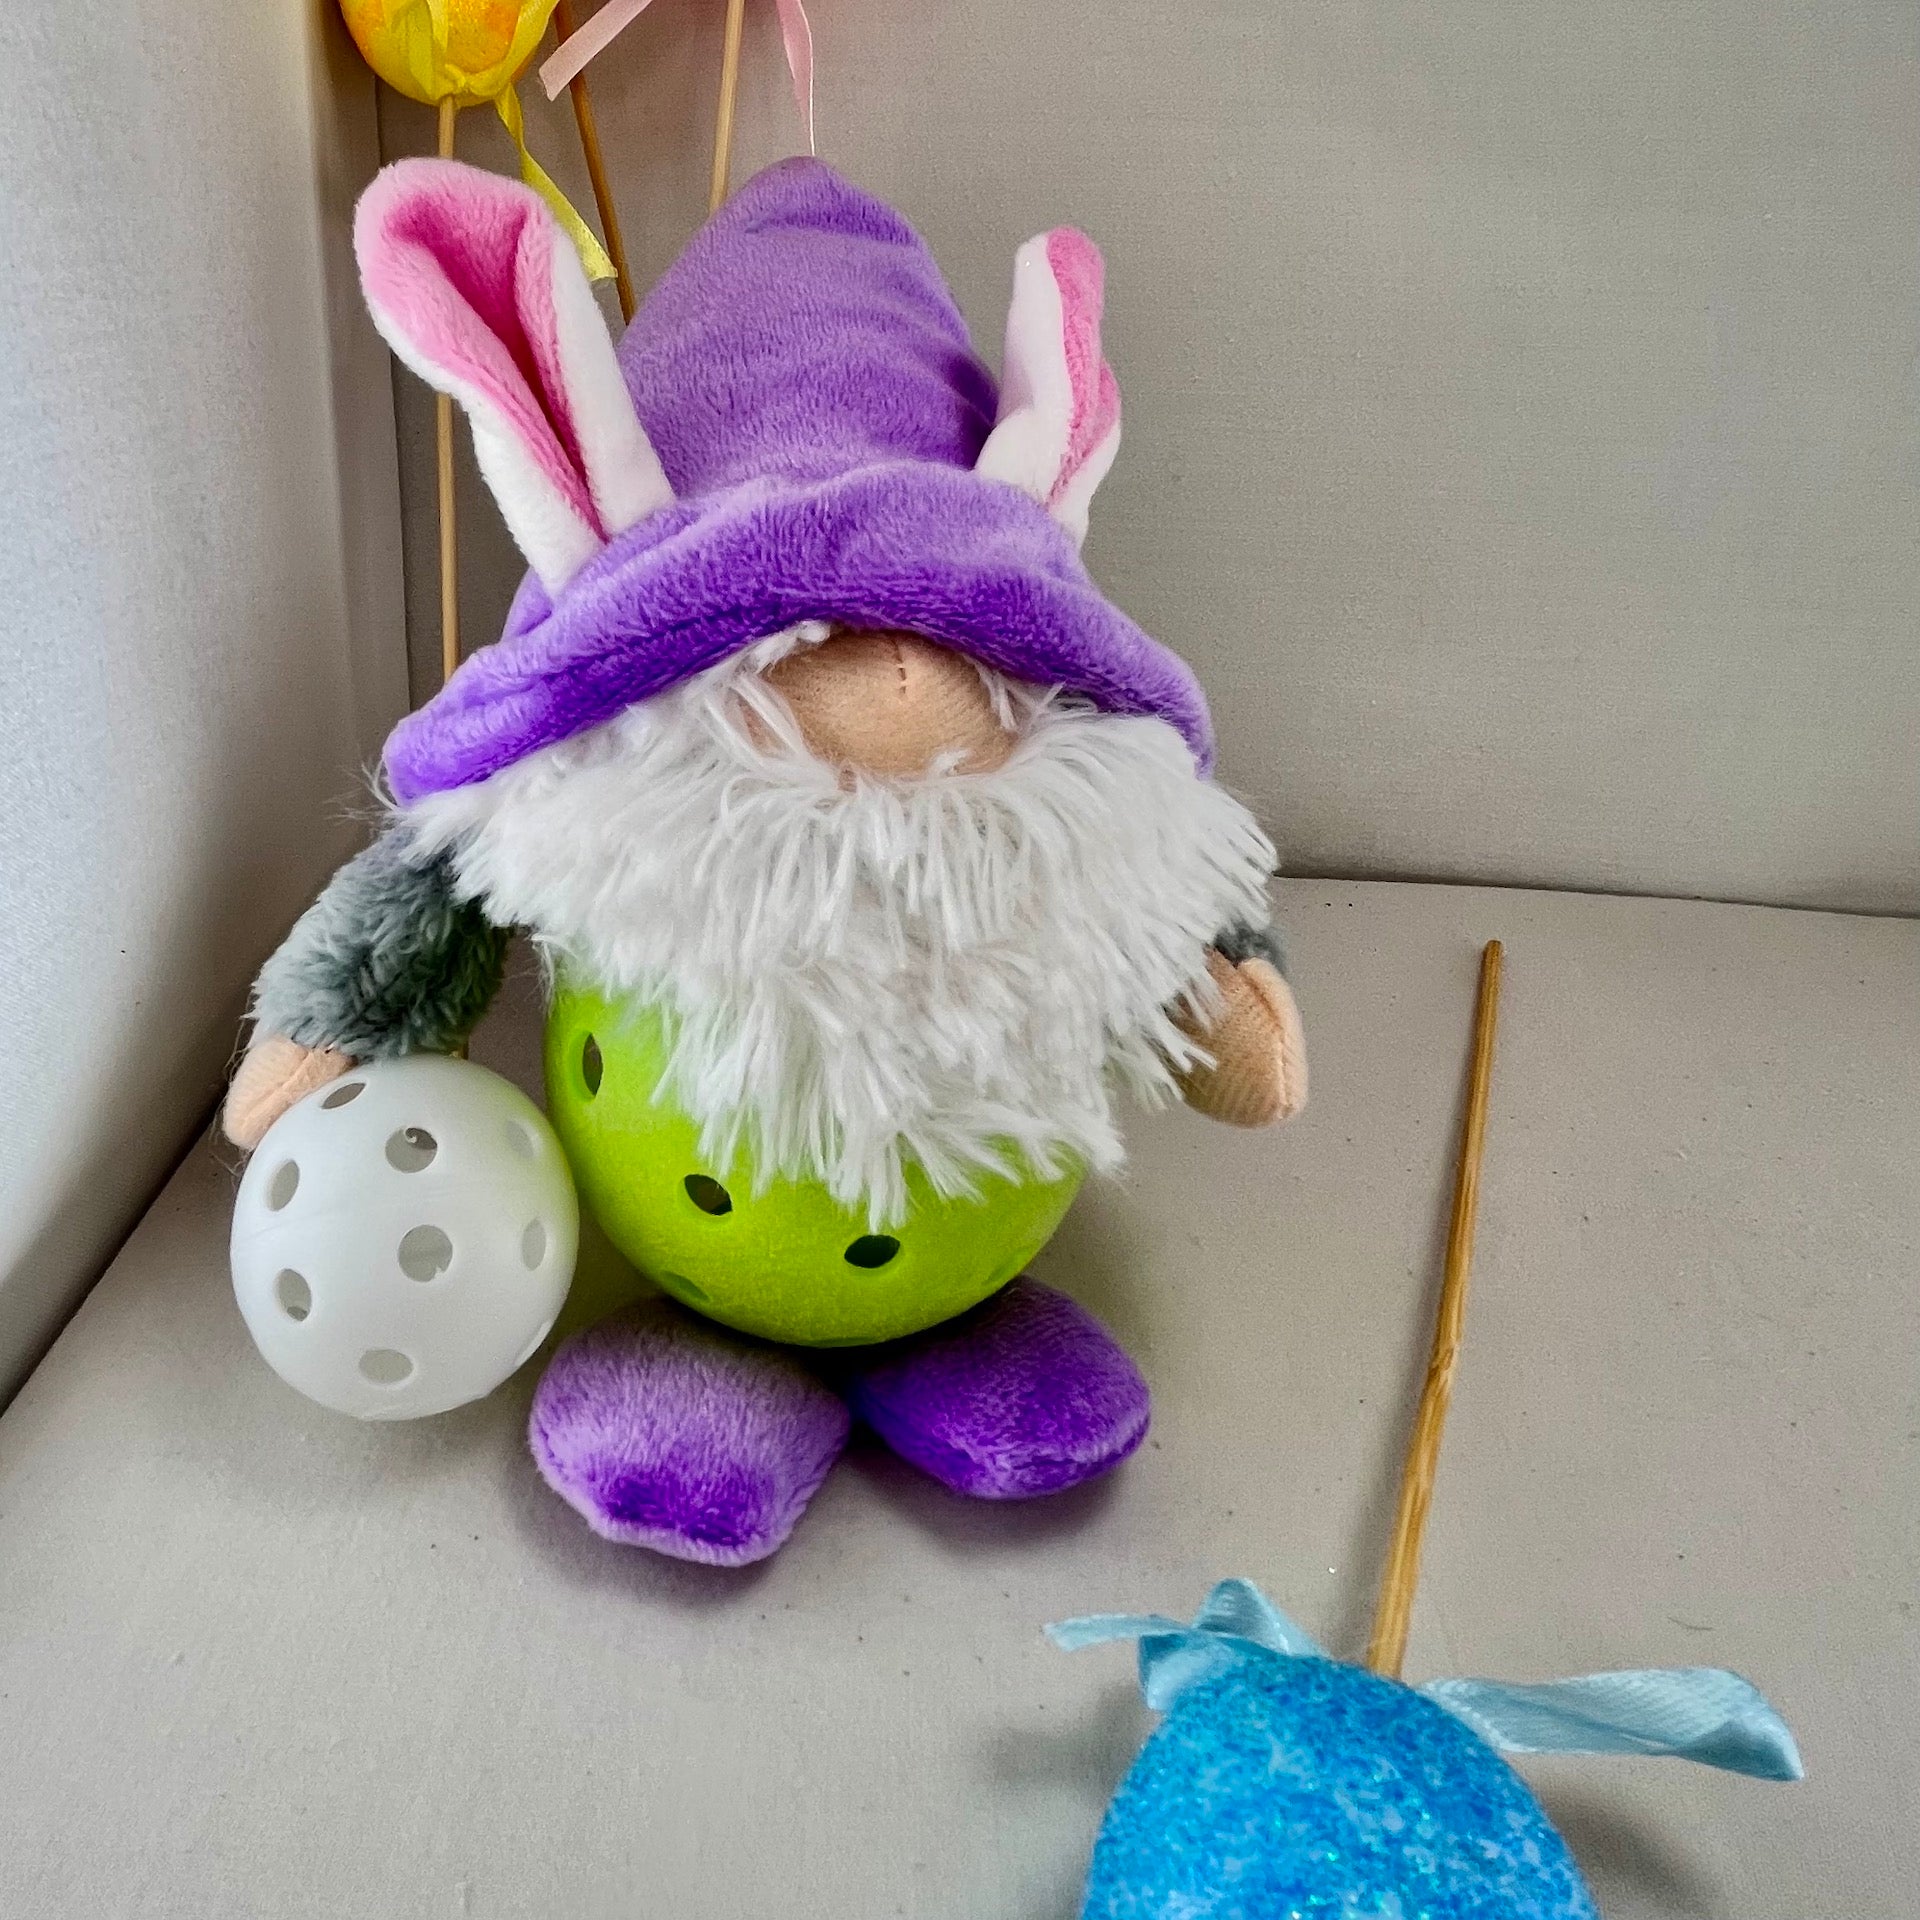 Upcycled Pickleball Easter bunny gnomes for the Easter Holiday.  Decoration or gift set.  These pint-sized pickleball gnomes are perfect for decoration or gifts for your pickleball addicted friends. Each Pickleball Gnome's body is an upcycled full-sized pickleball with a cute little egg in their hands.